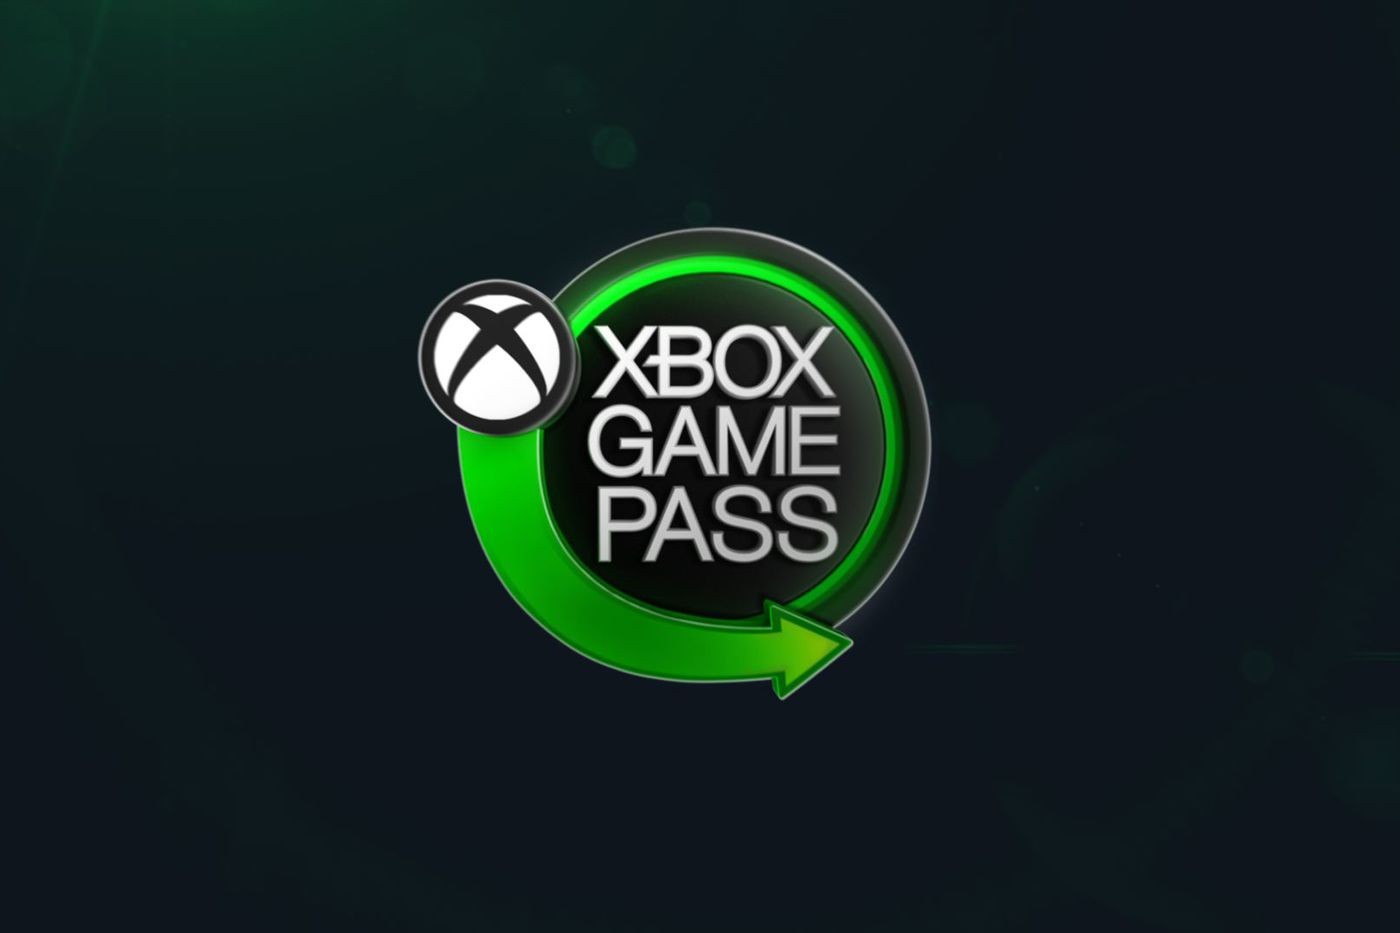 April has been a great month for Game Pass, with a solid lineup of both AAA and indie games.